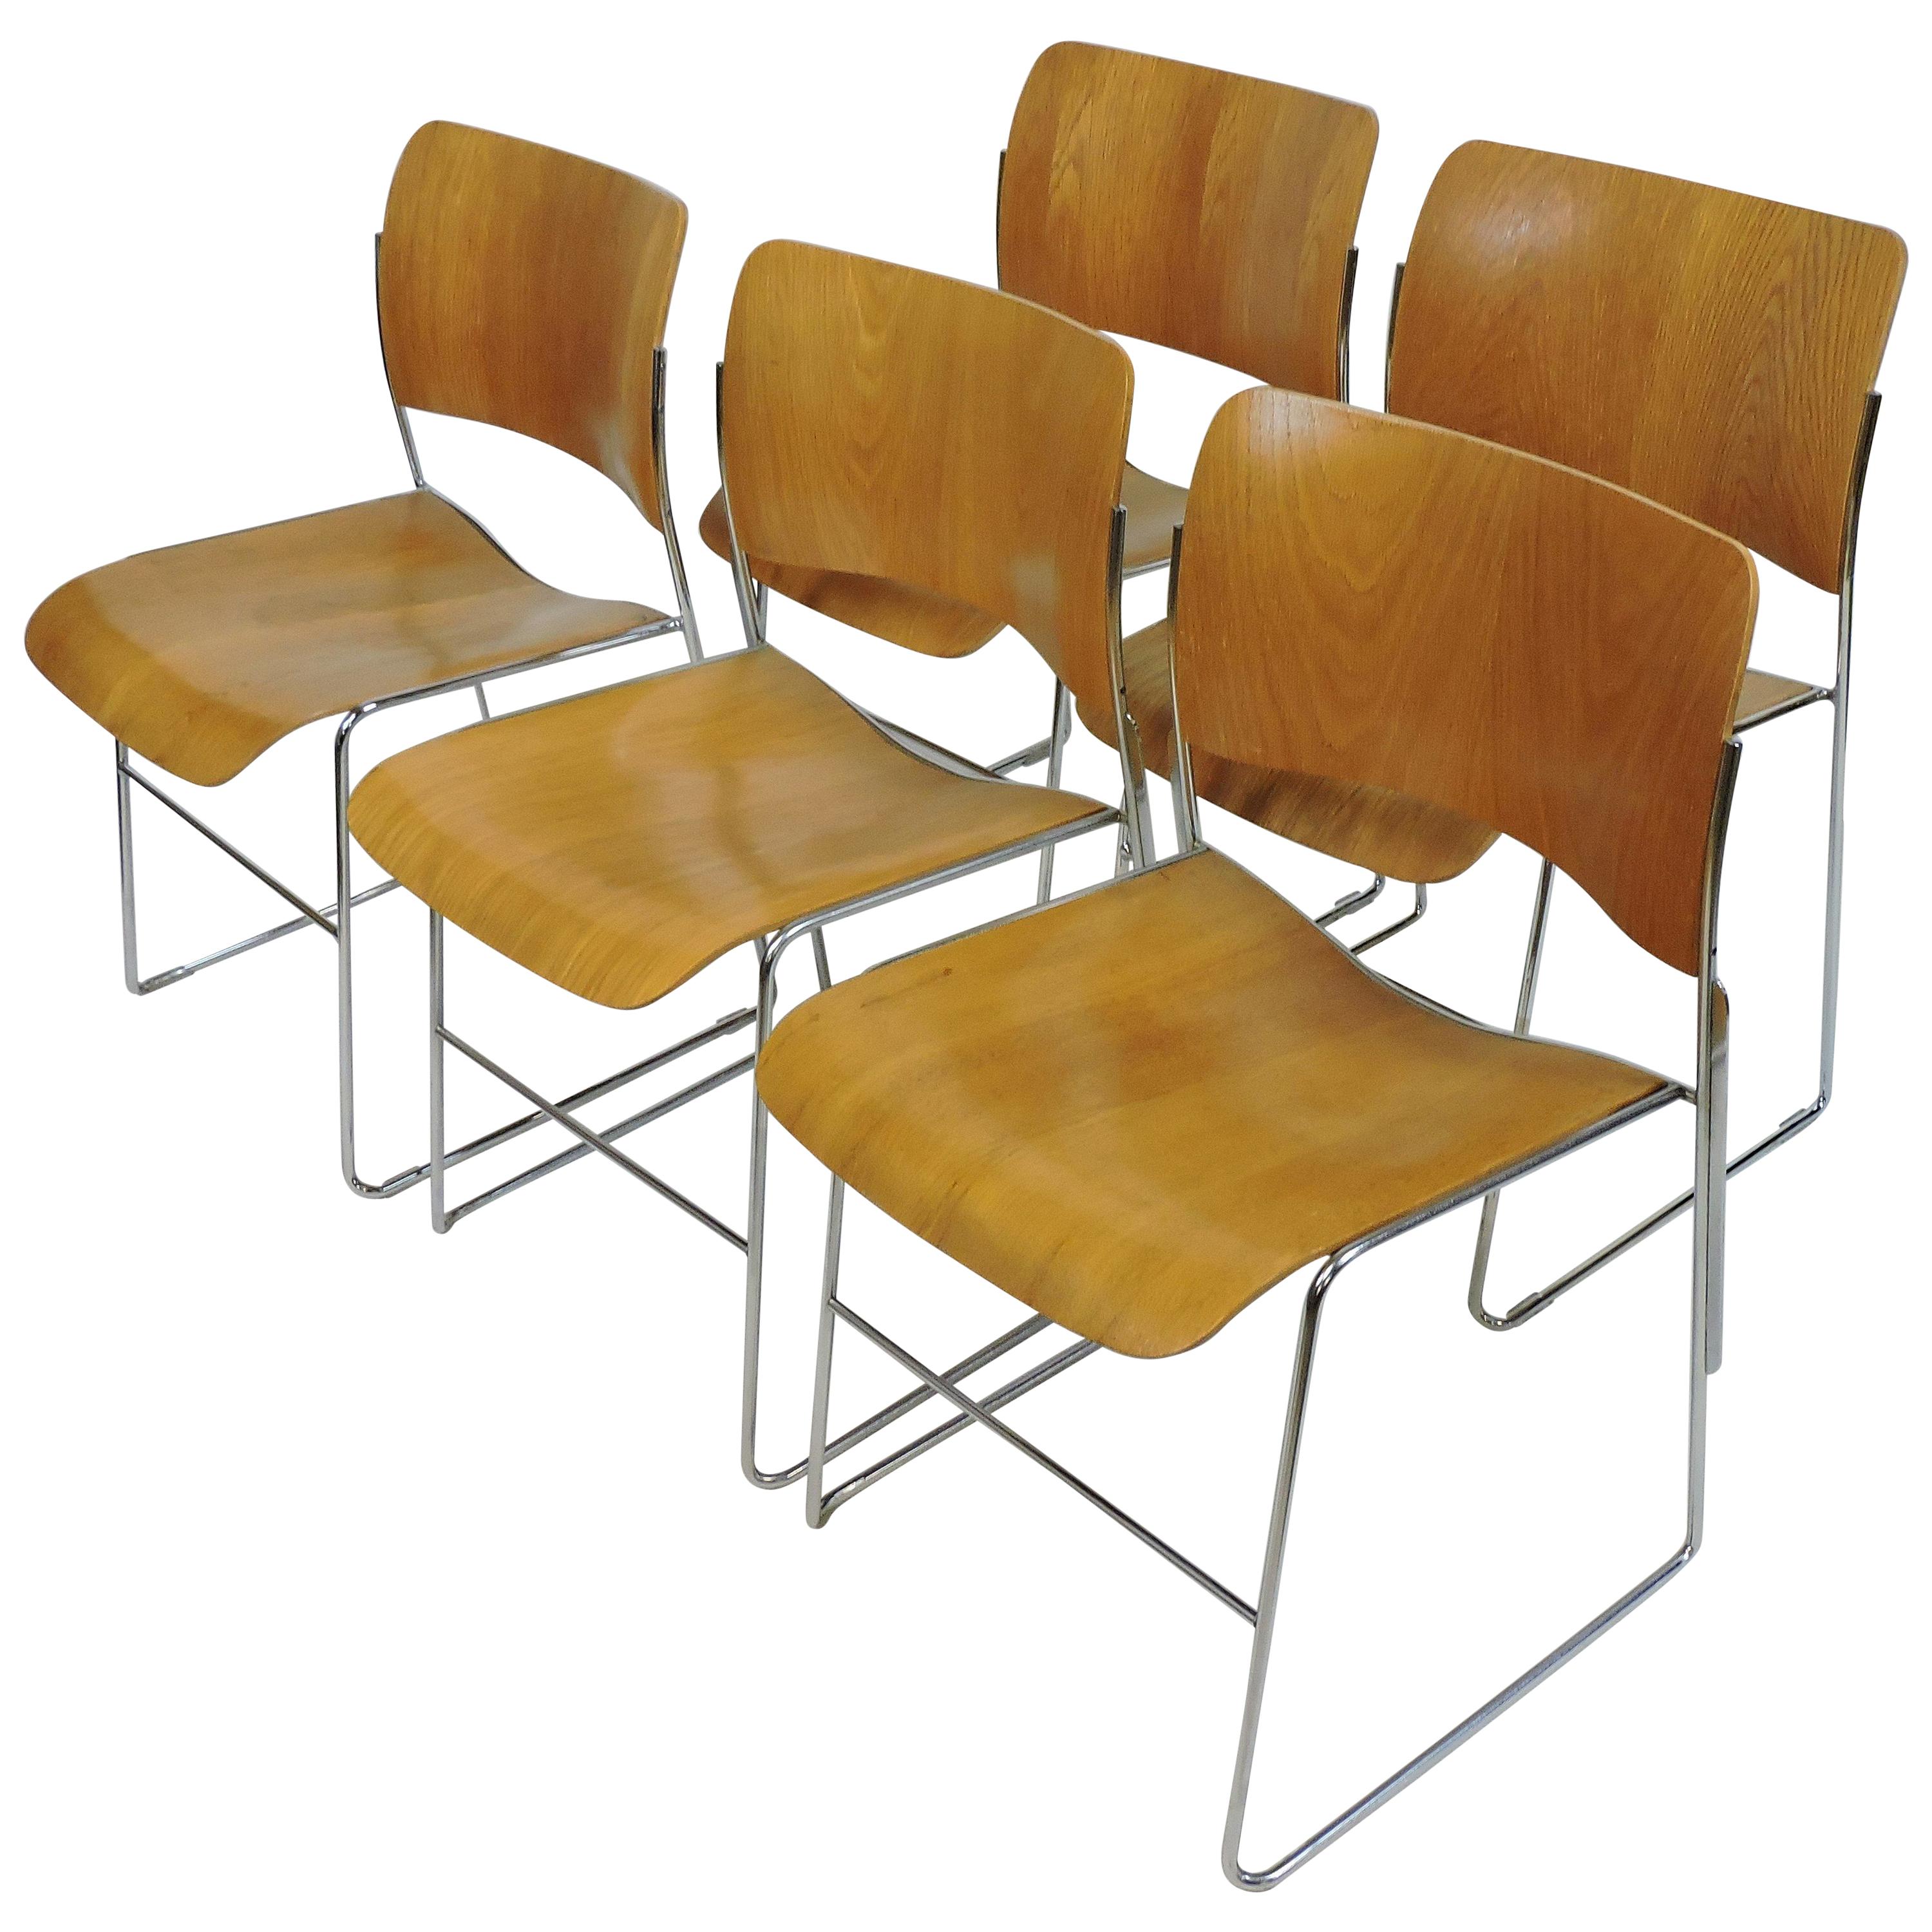 David Rowland Furniture 12 For Sale At 1stdibs